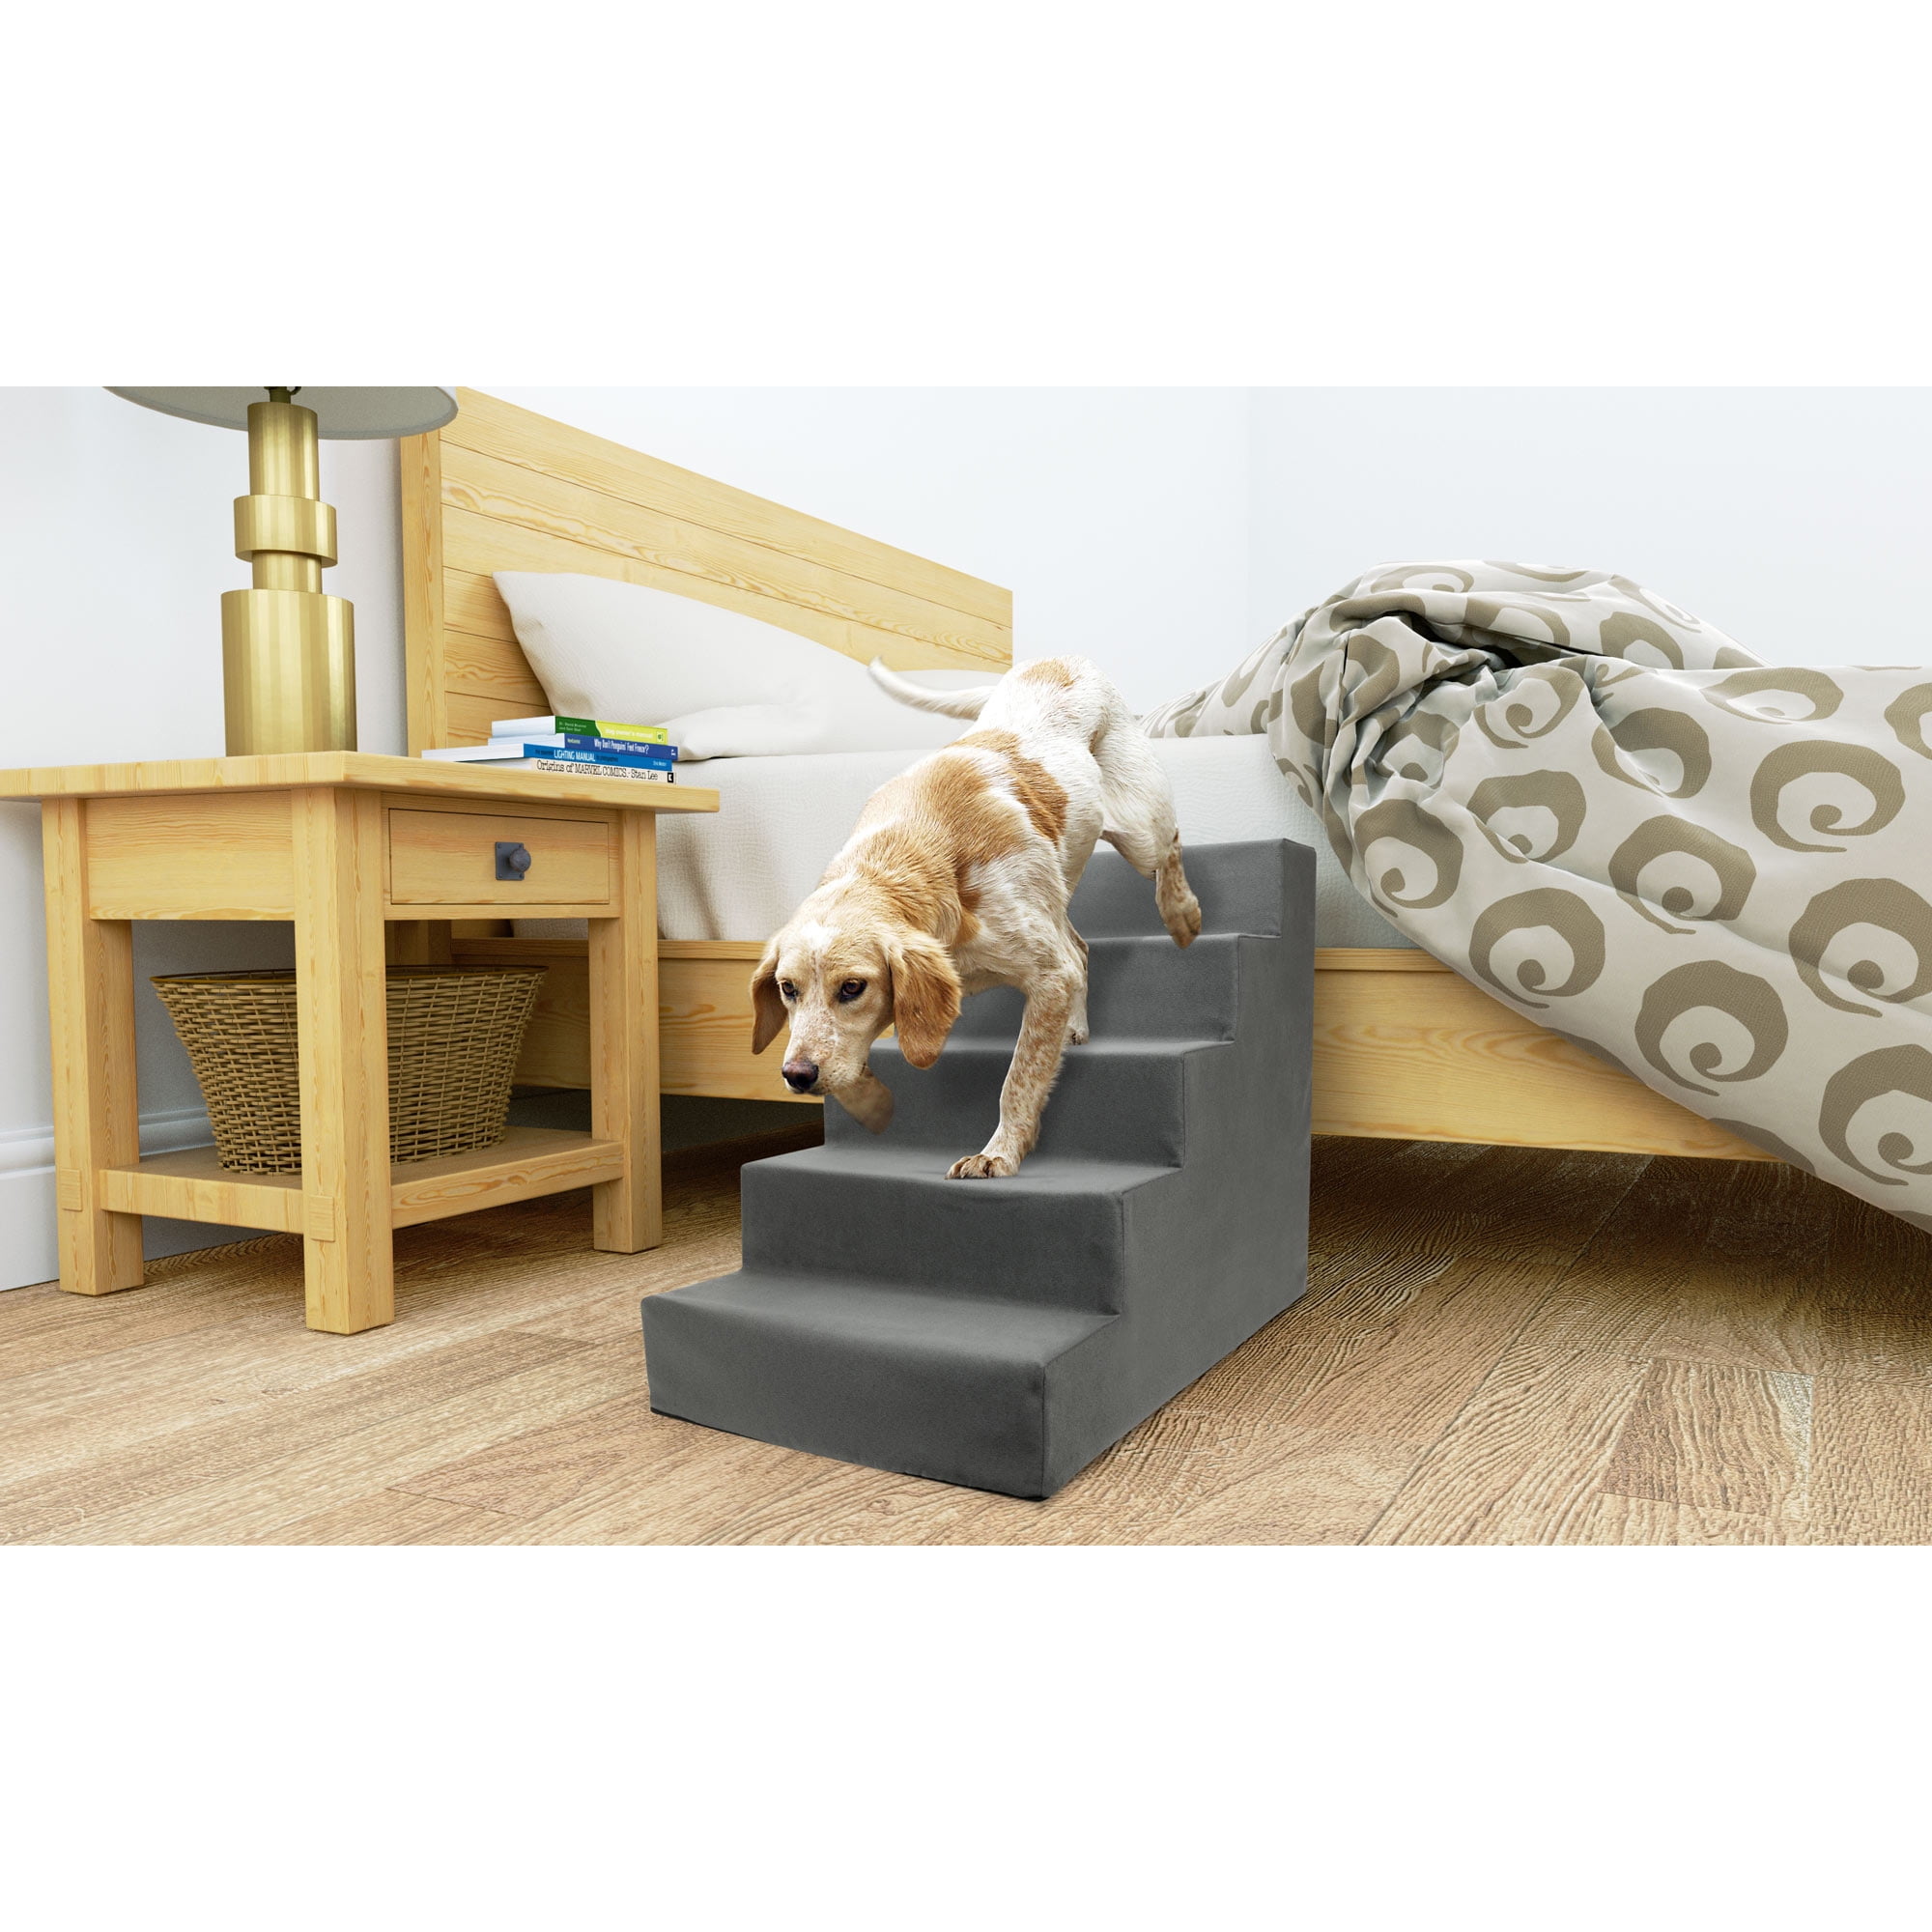 Sofa/Car/High Bed Dog Stairs Foldable Wooden Pet Steps/Stairs with Non-Slip Surface and Sponge Foam Large 2/4 File Pets Ramp for Dogs and Cats